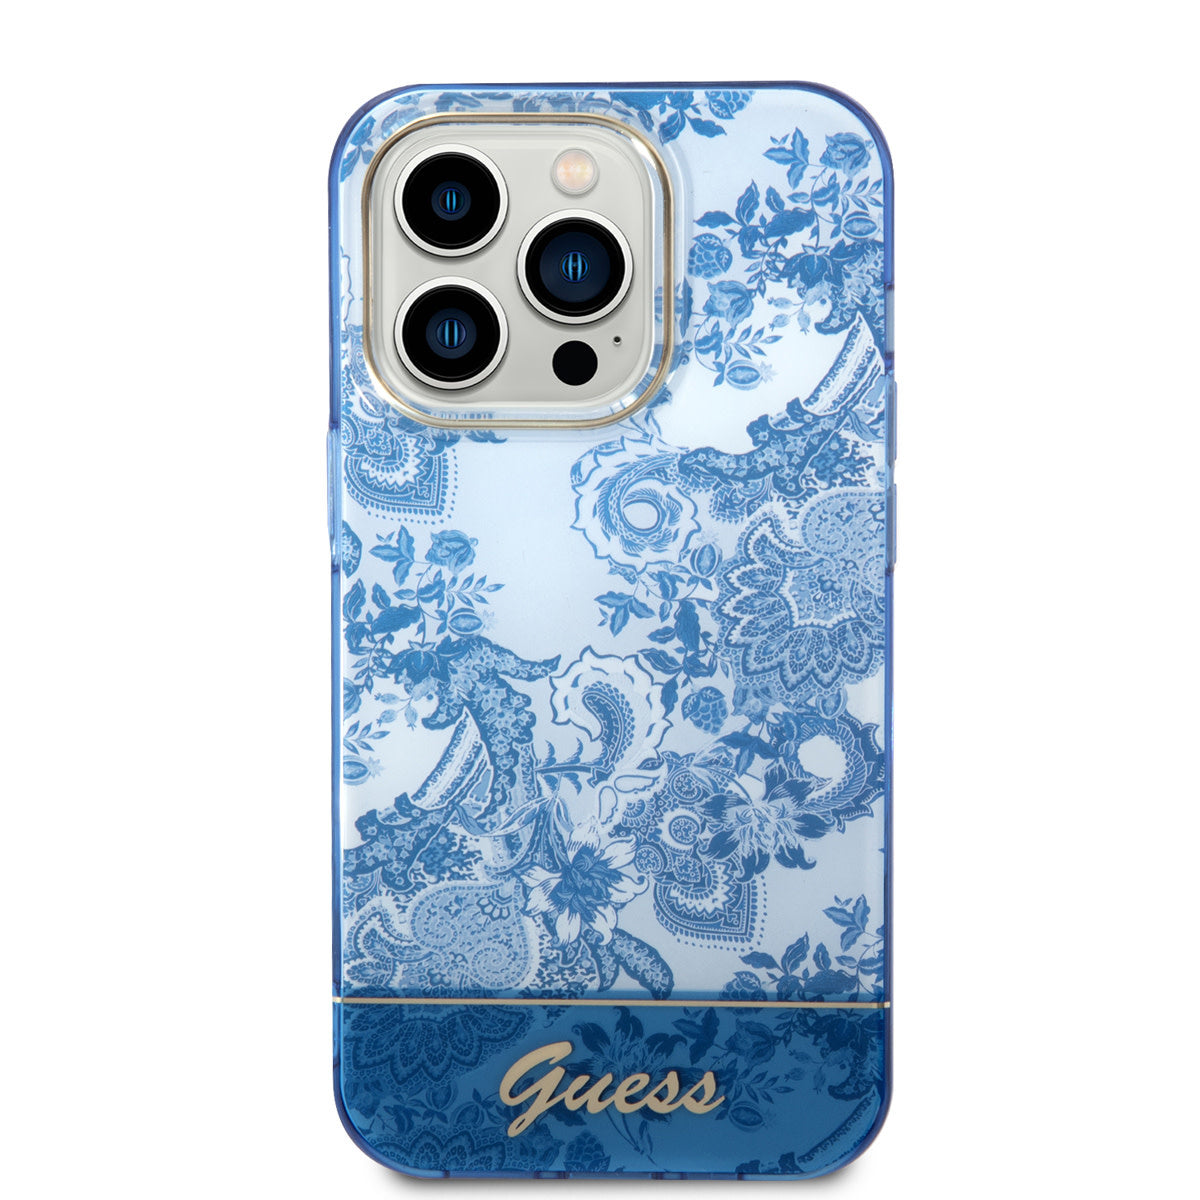 Guess iPhone 14 Pro Max Backcover - Porselein Collectie  - Blauw